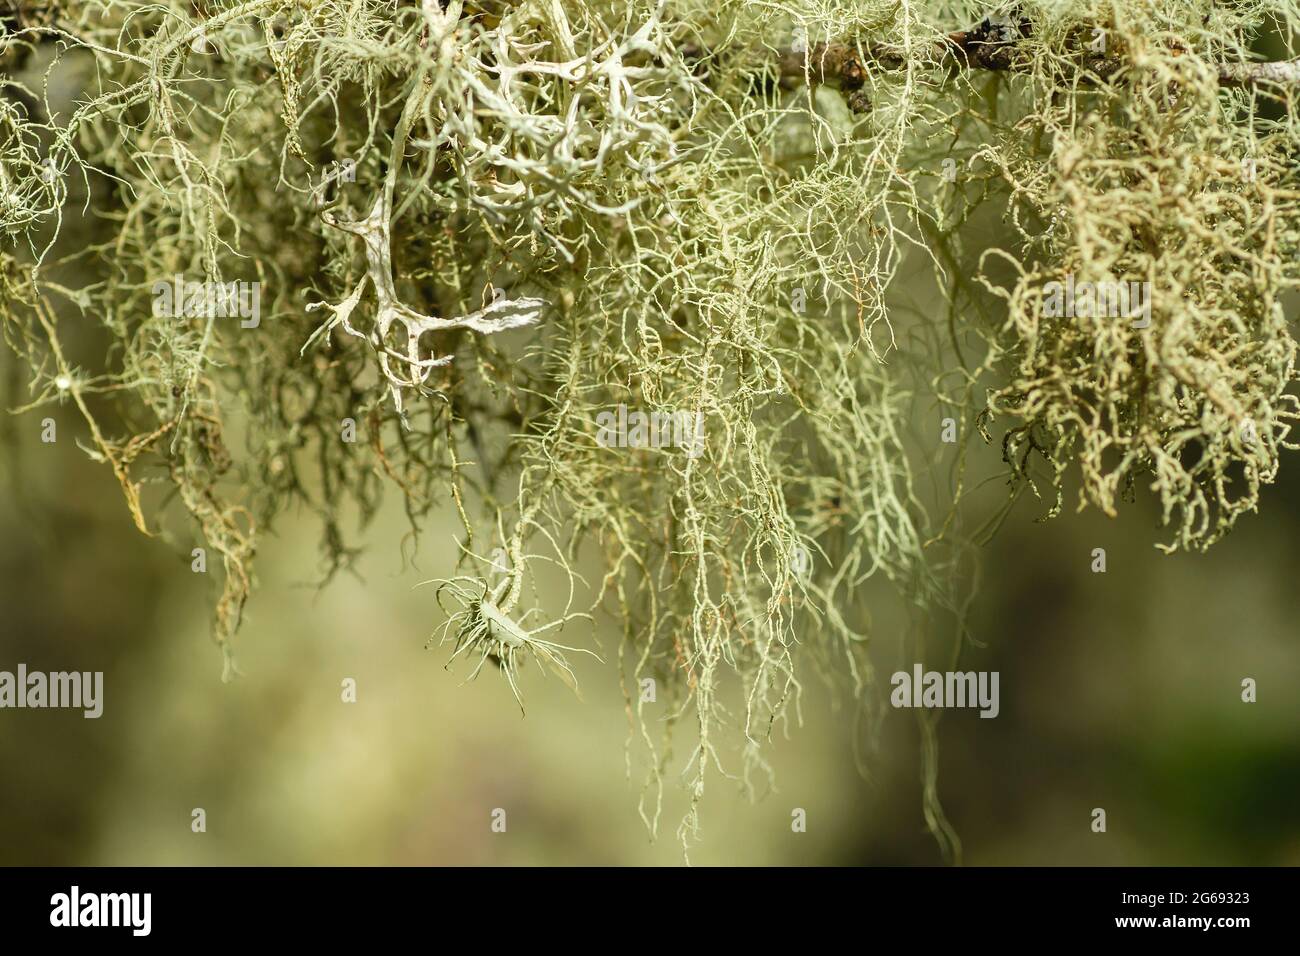 Usnea and evernia lichens hanging on a tree branch Stock Photo